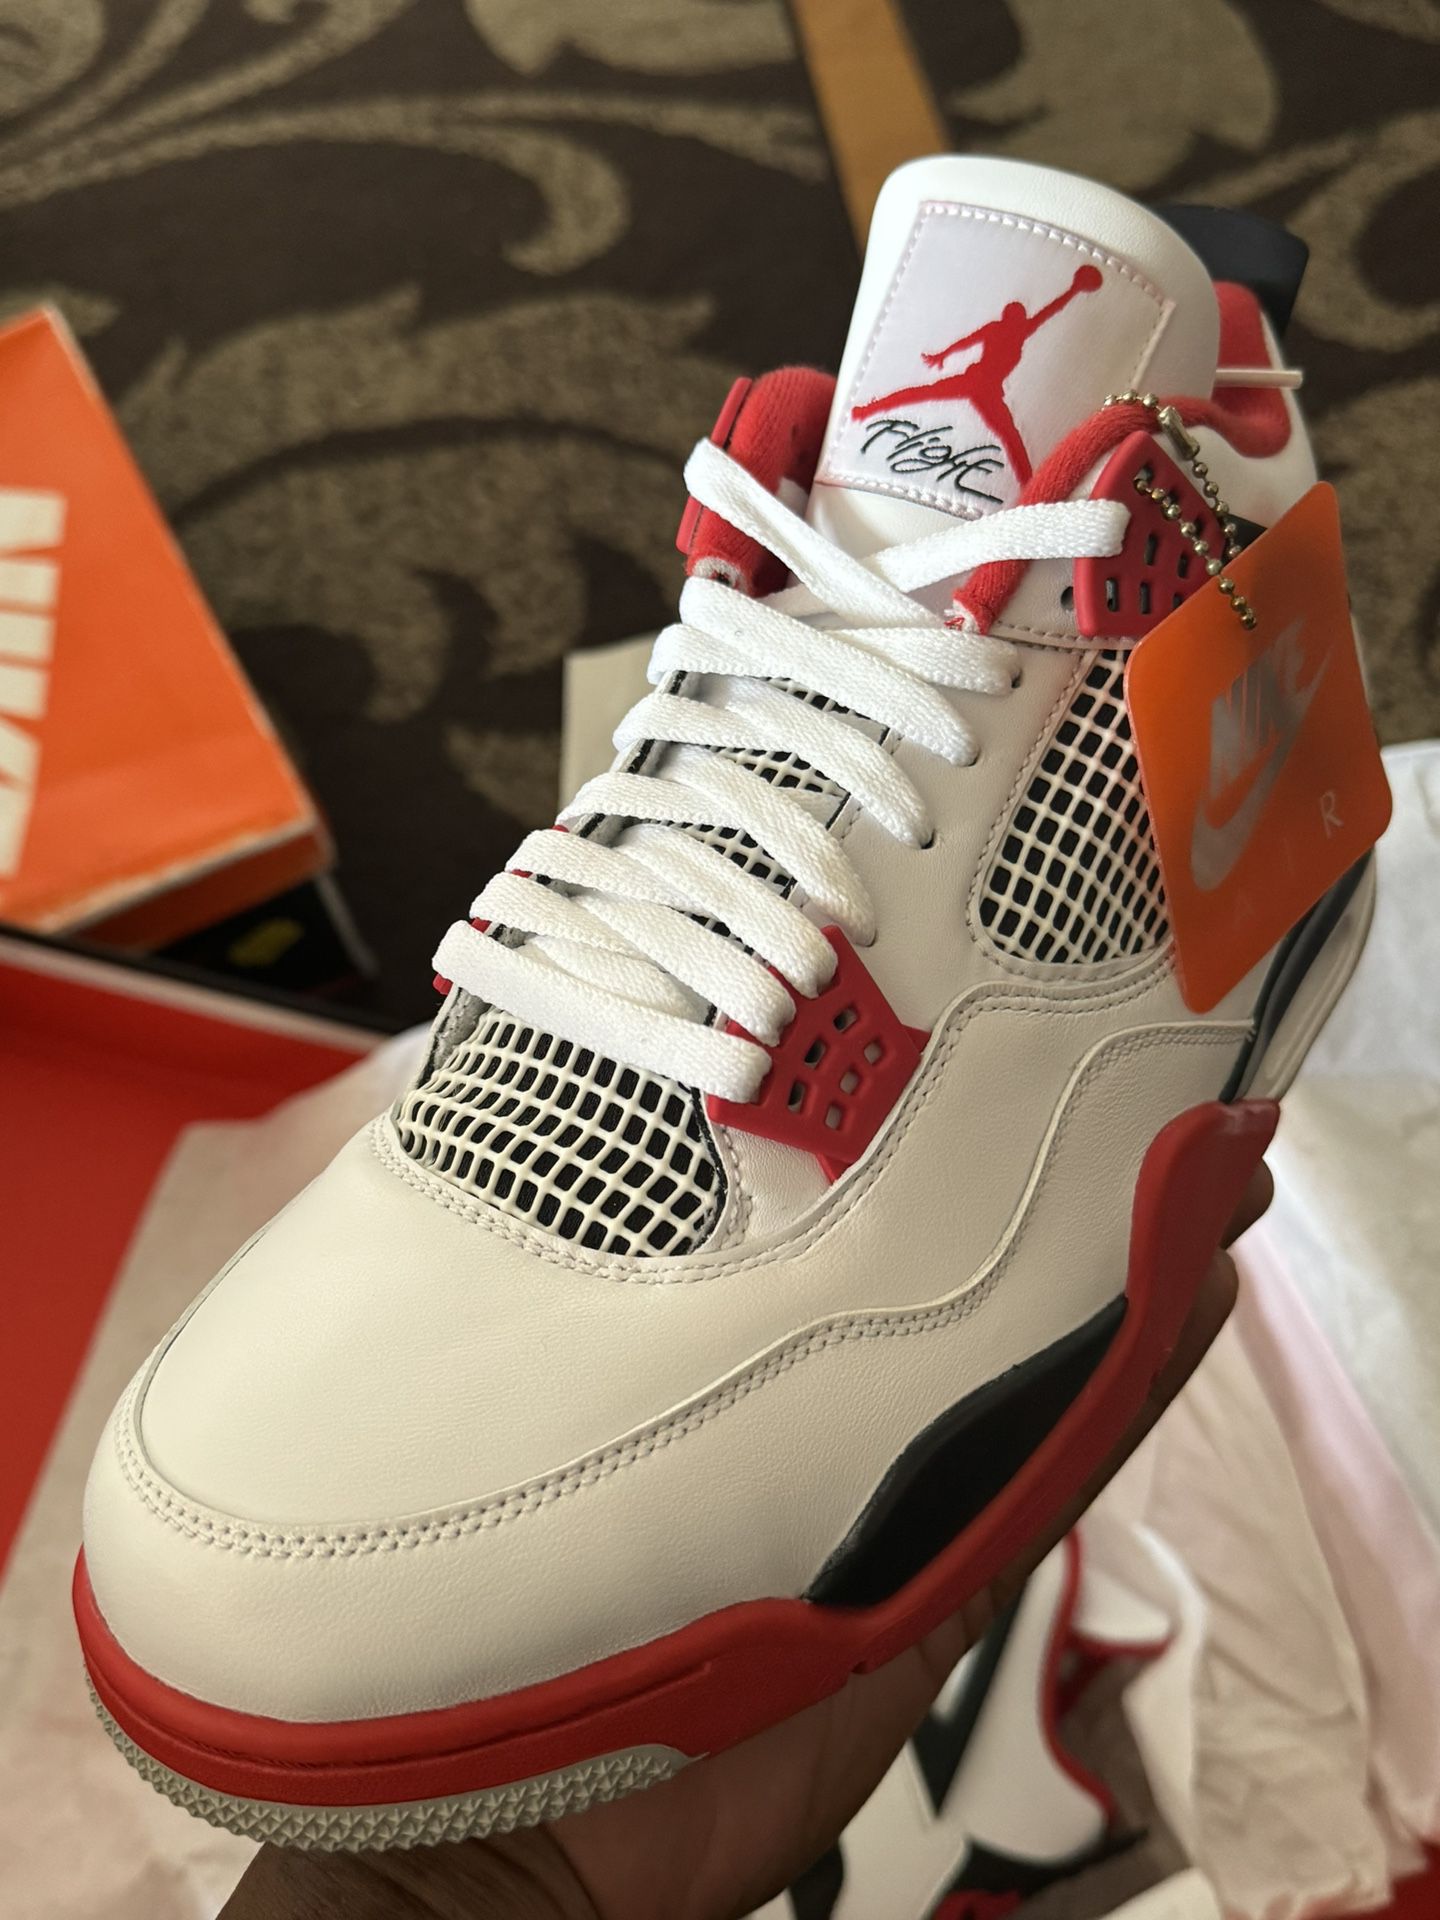 Fire Red 4s